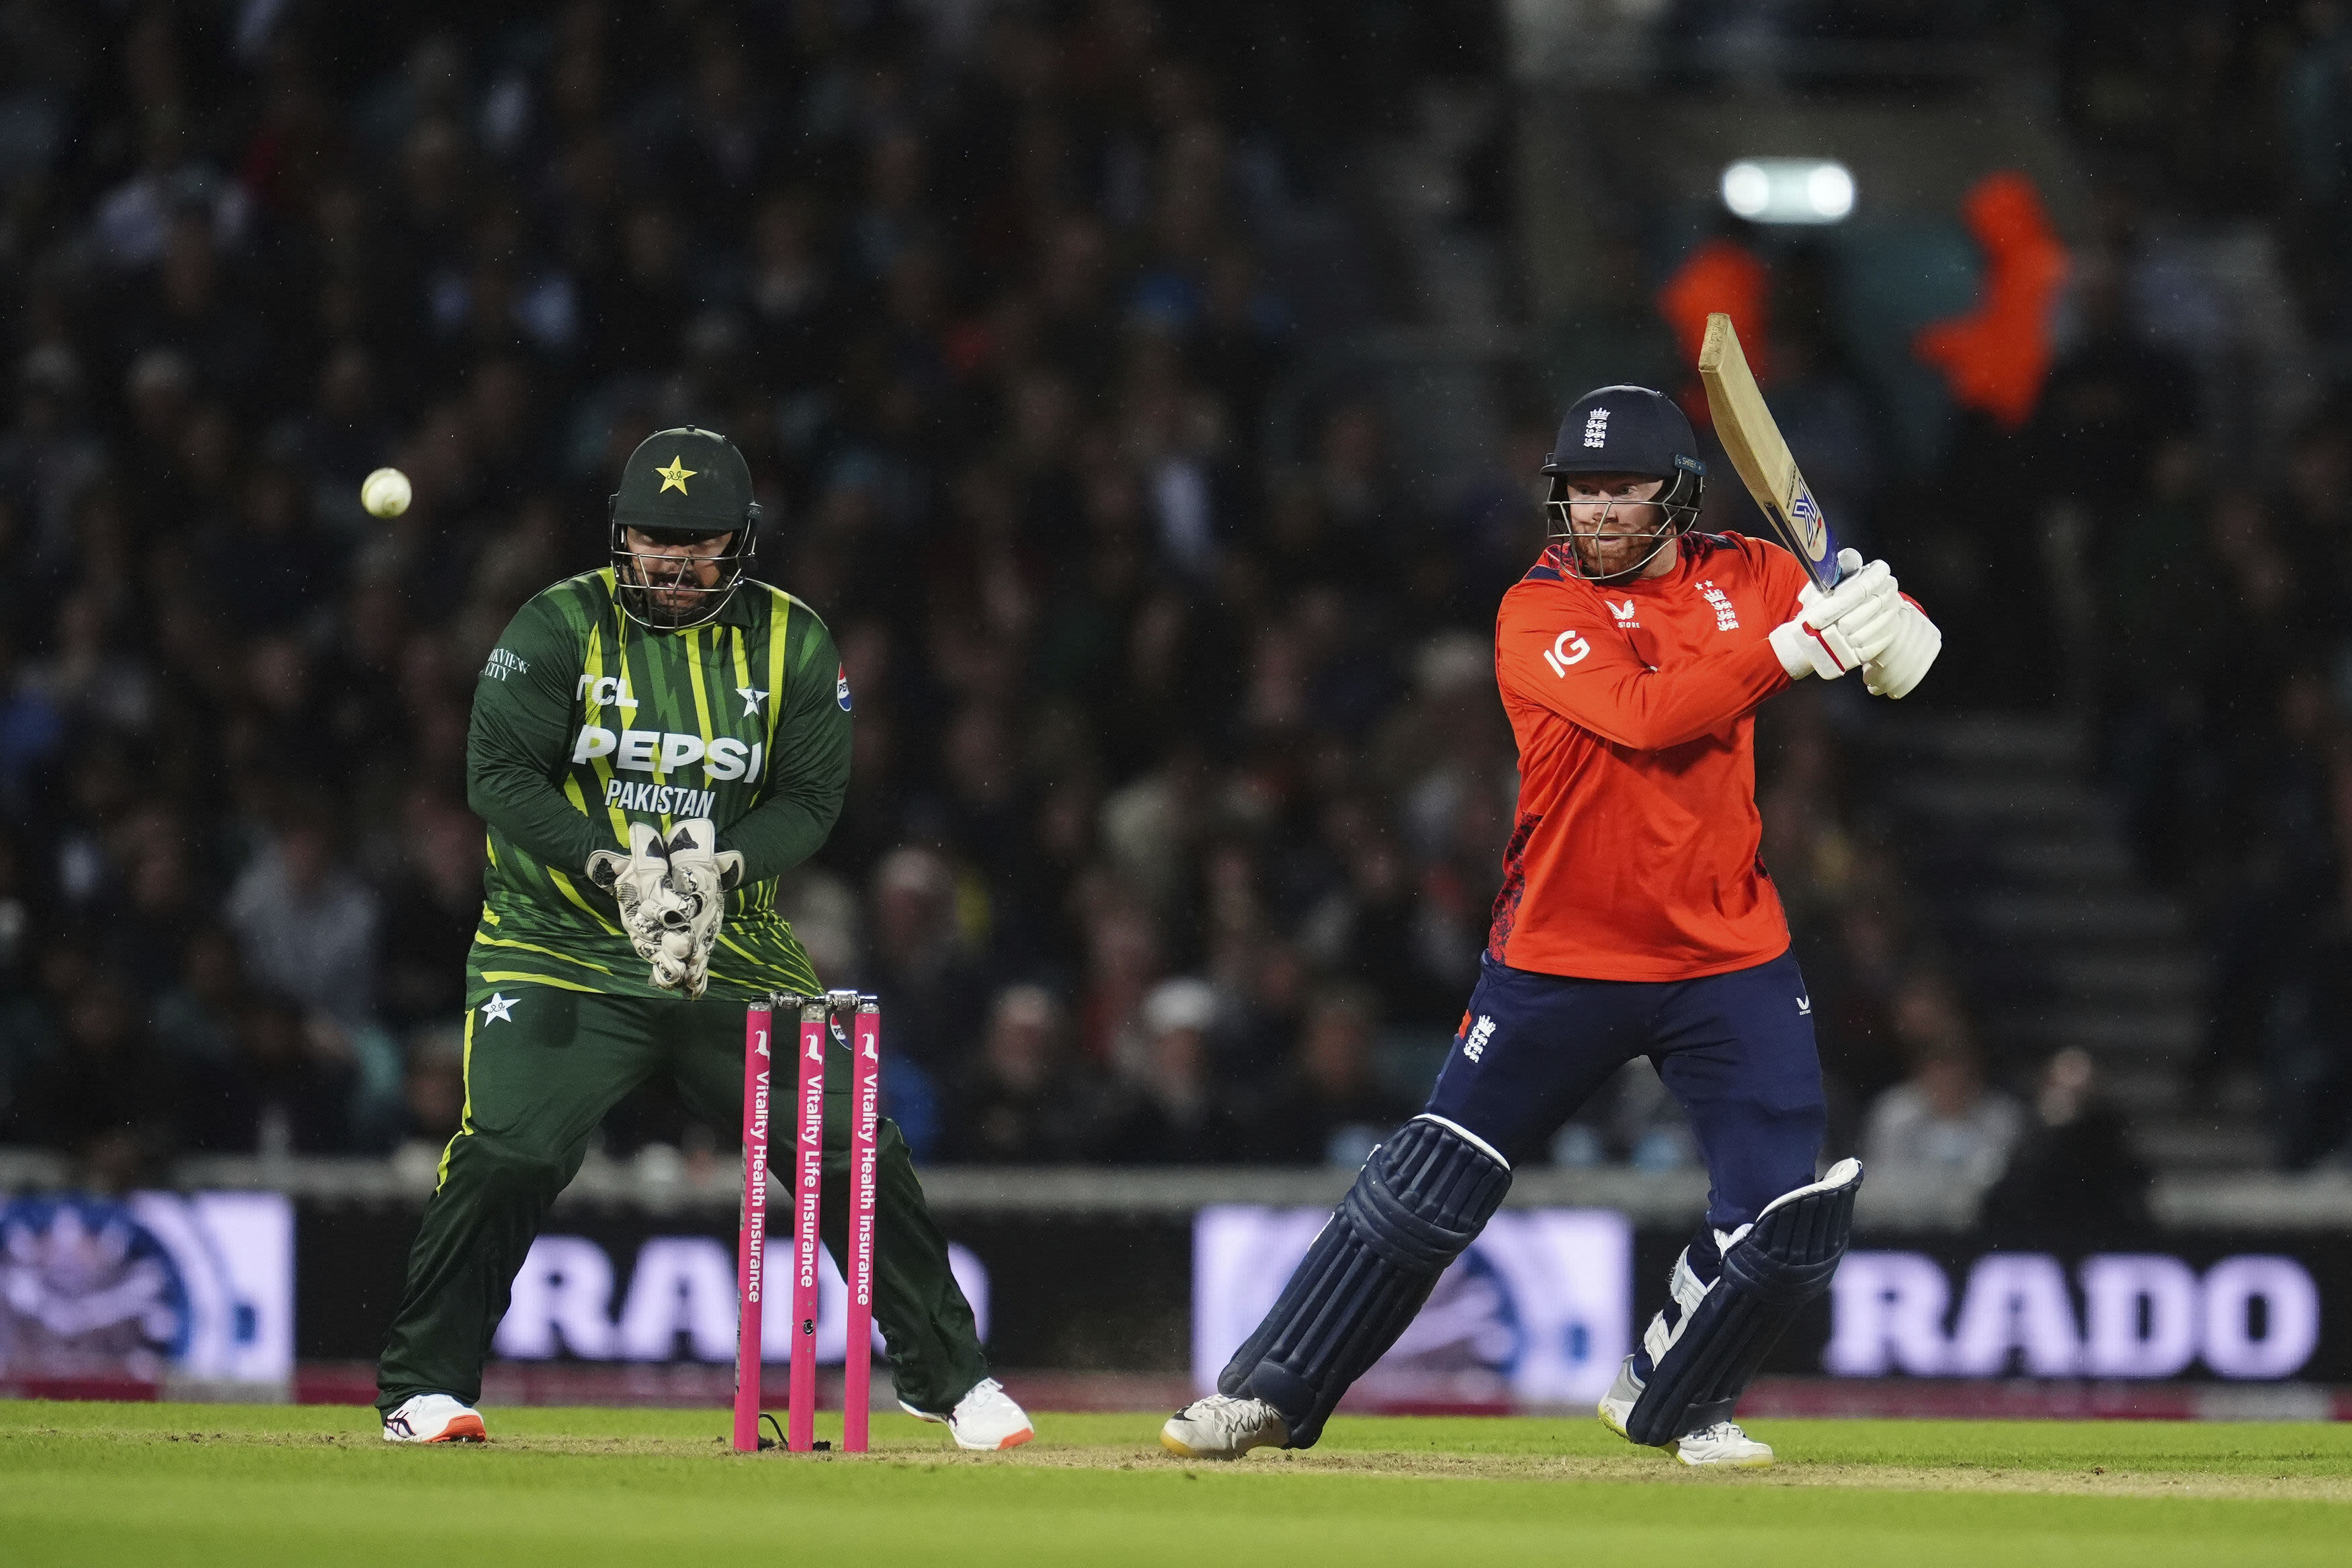 England heads into T20 World Cup title defense with 2-0 series win over Pakistan